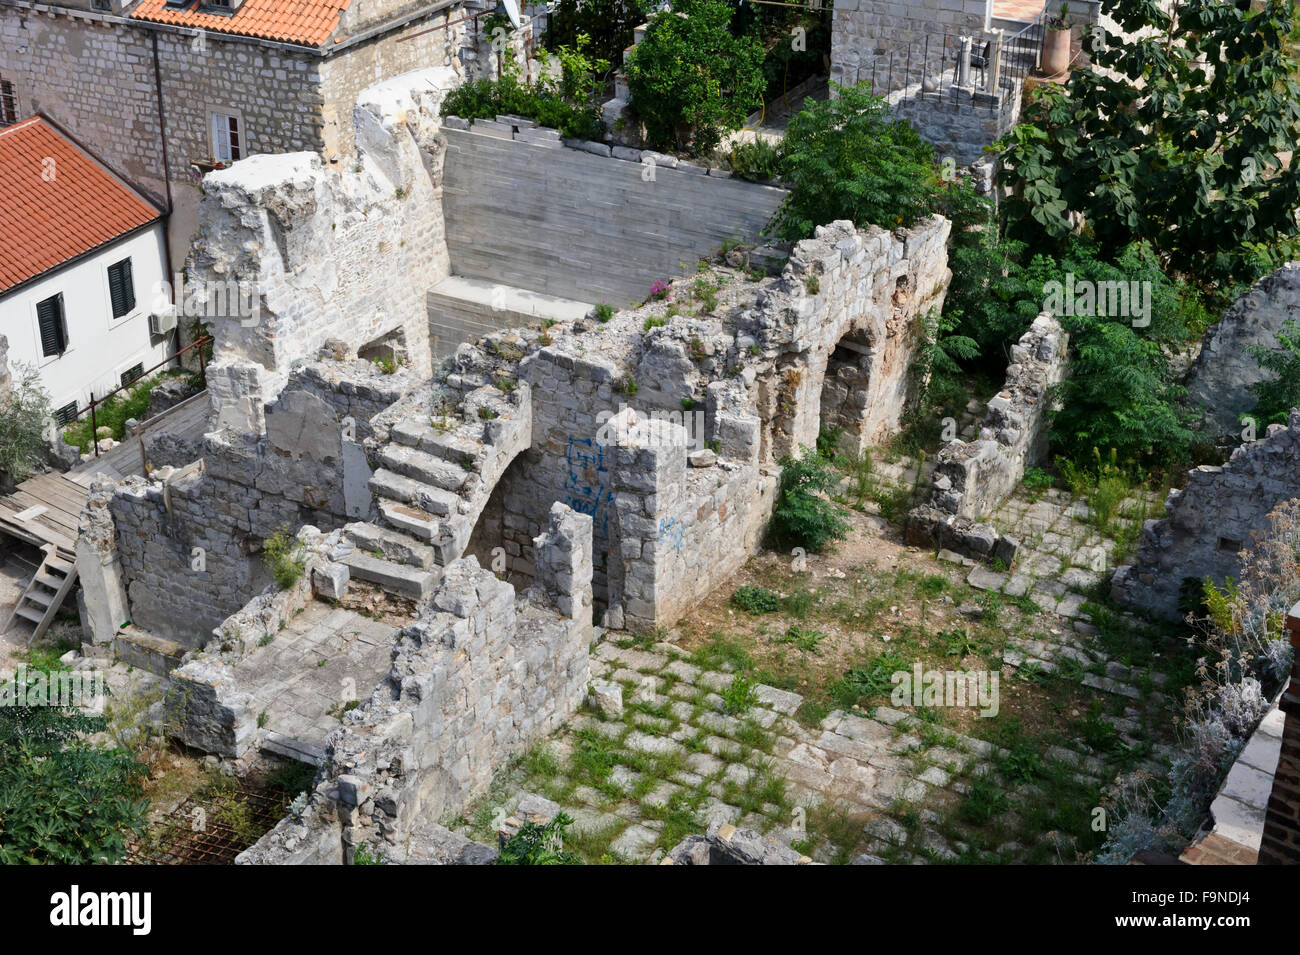 A ruin building within the walls of the old fortress in Dubrovnik, Croatia. Stock Photo